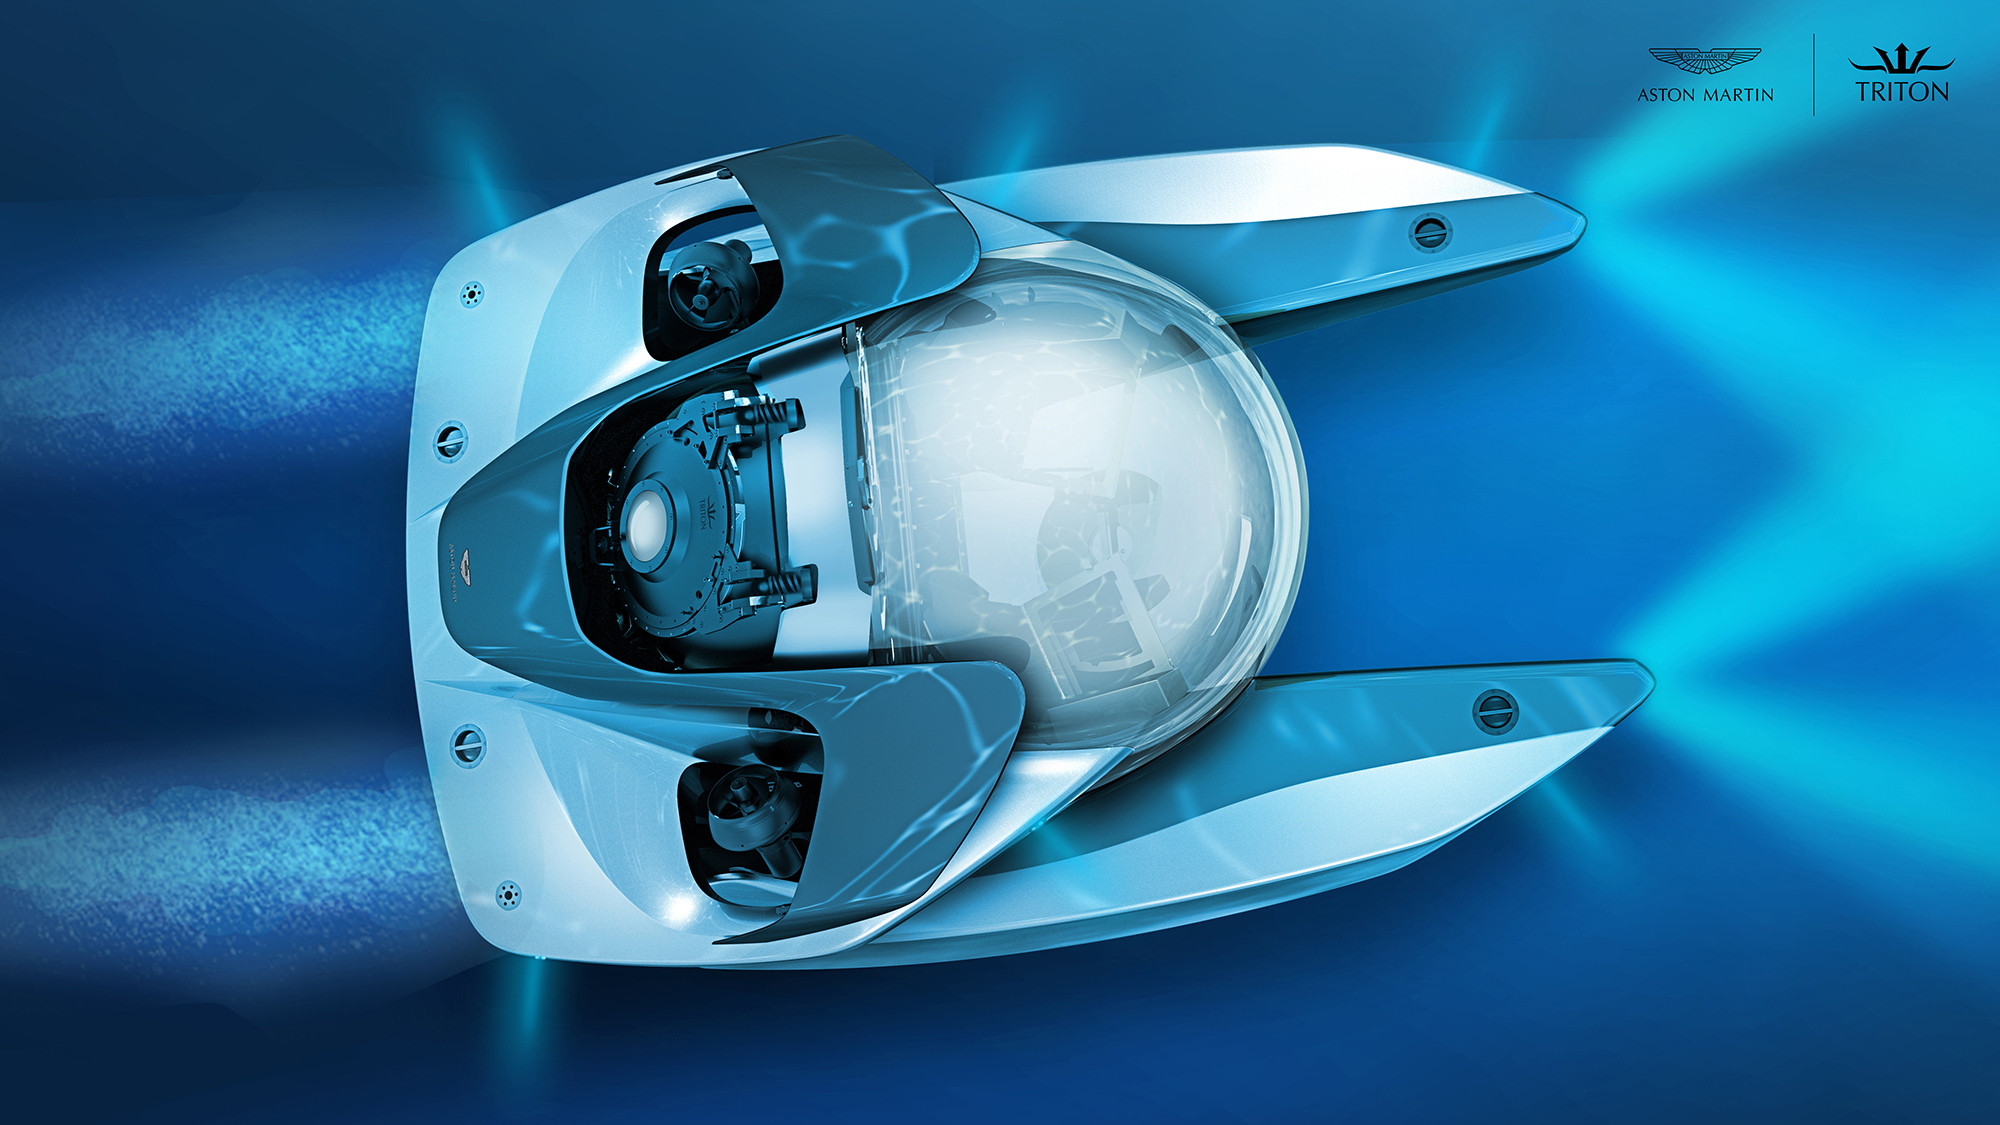 Project Neptune created by Triton Submarines and Aston Martin